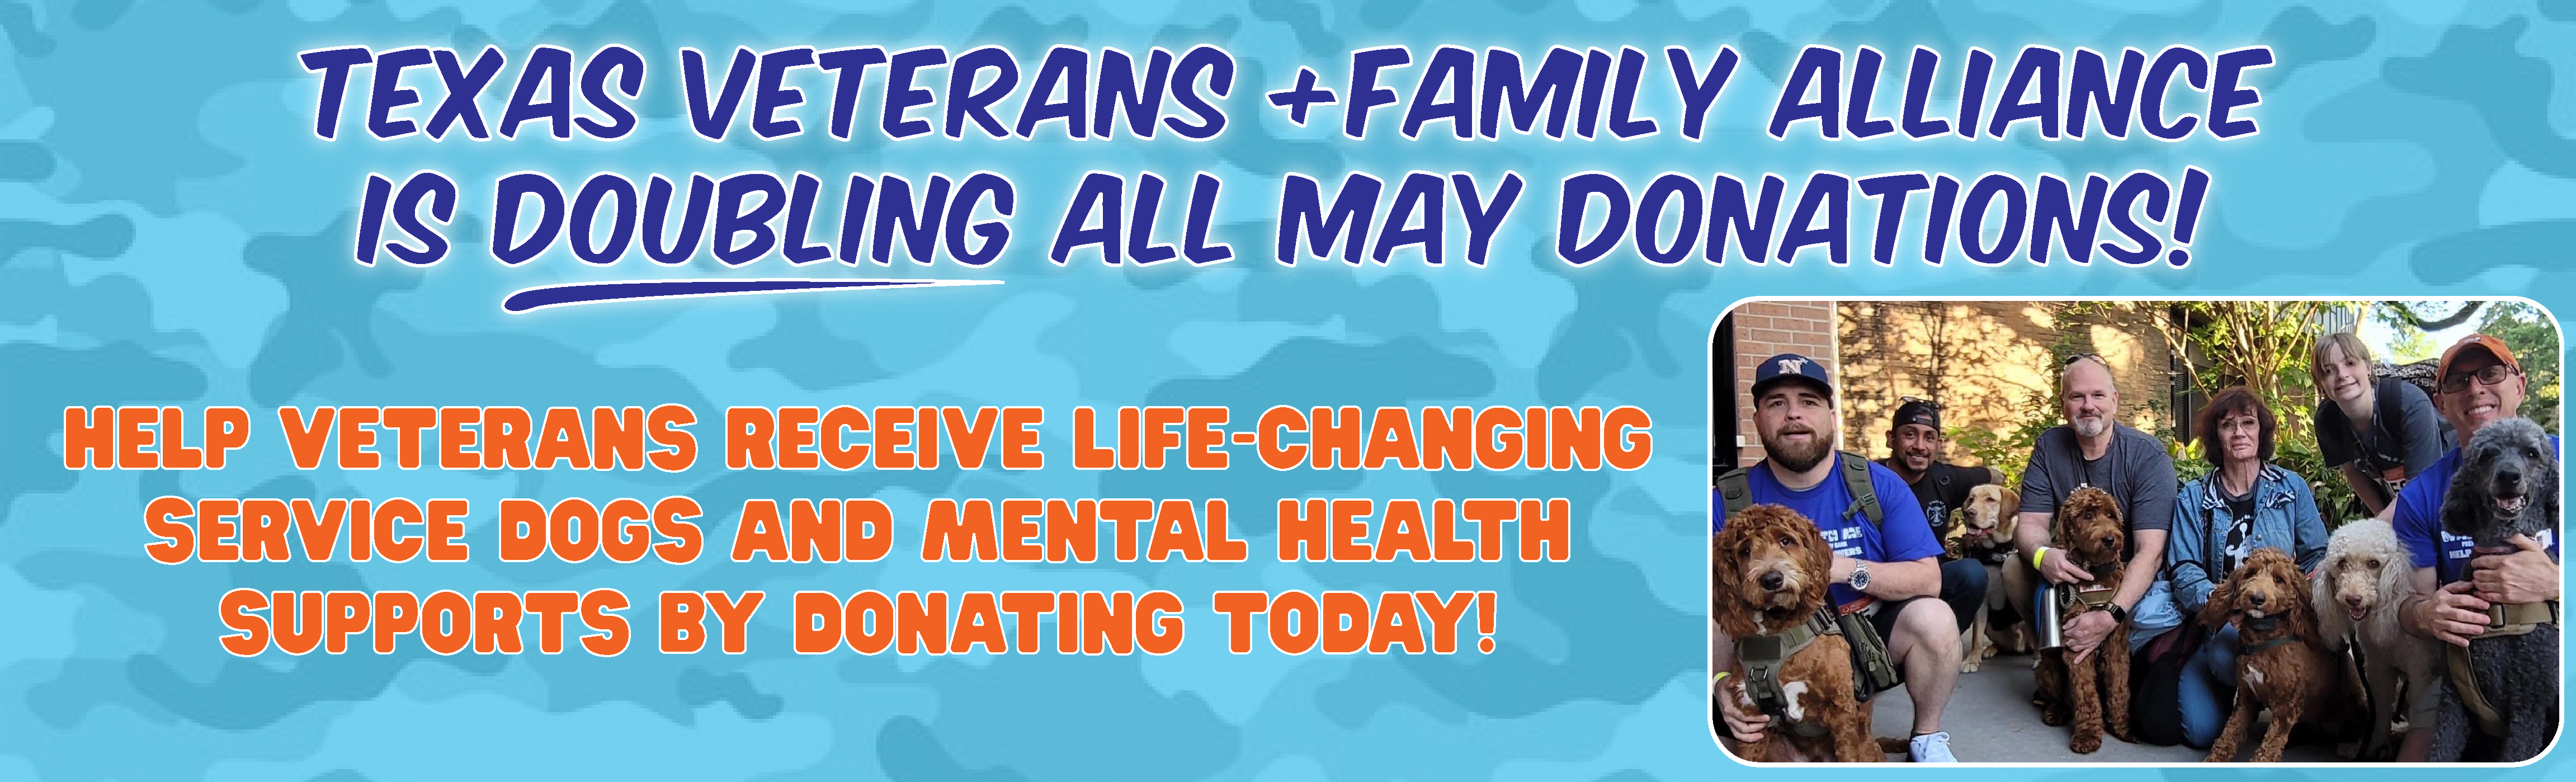 Support Veterans during Military Appreciation Month and Mental Health Awareness Month